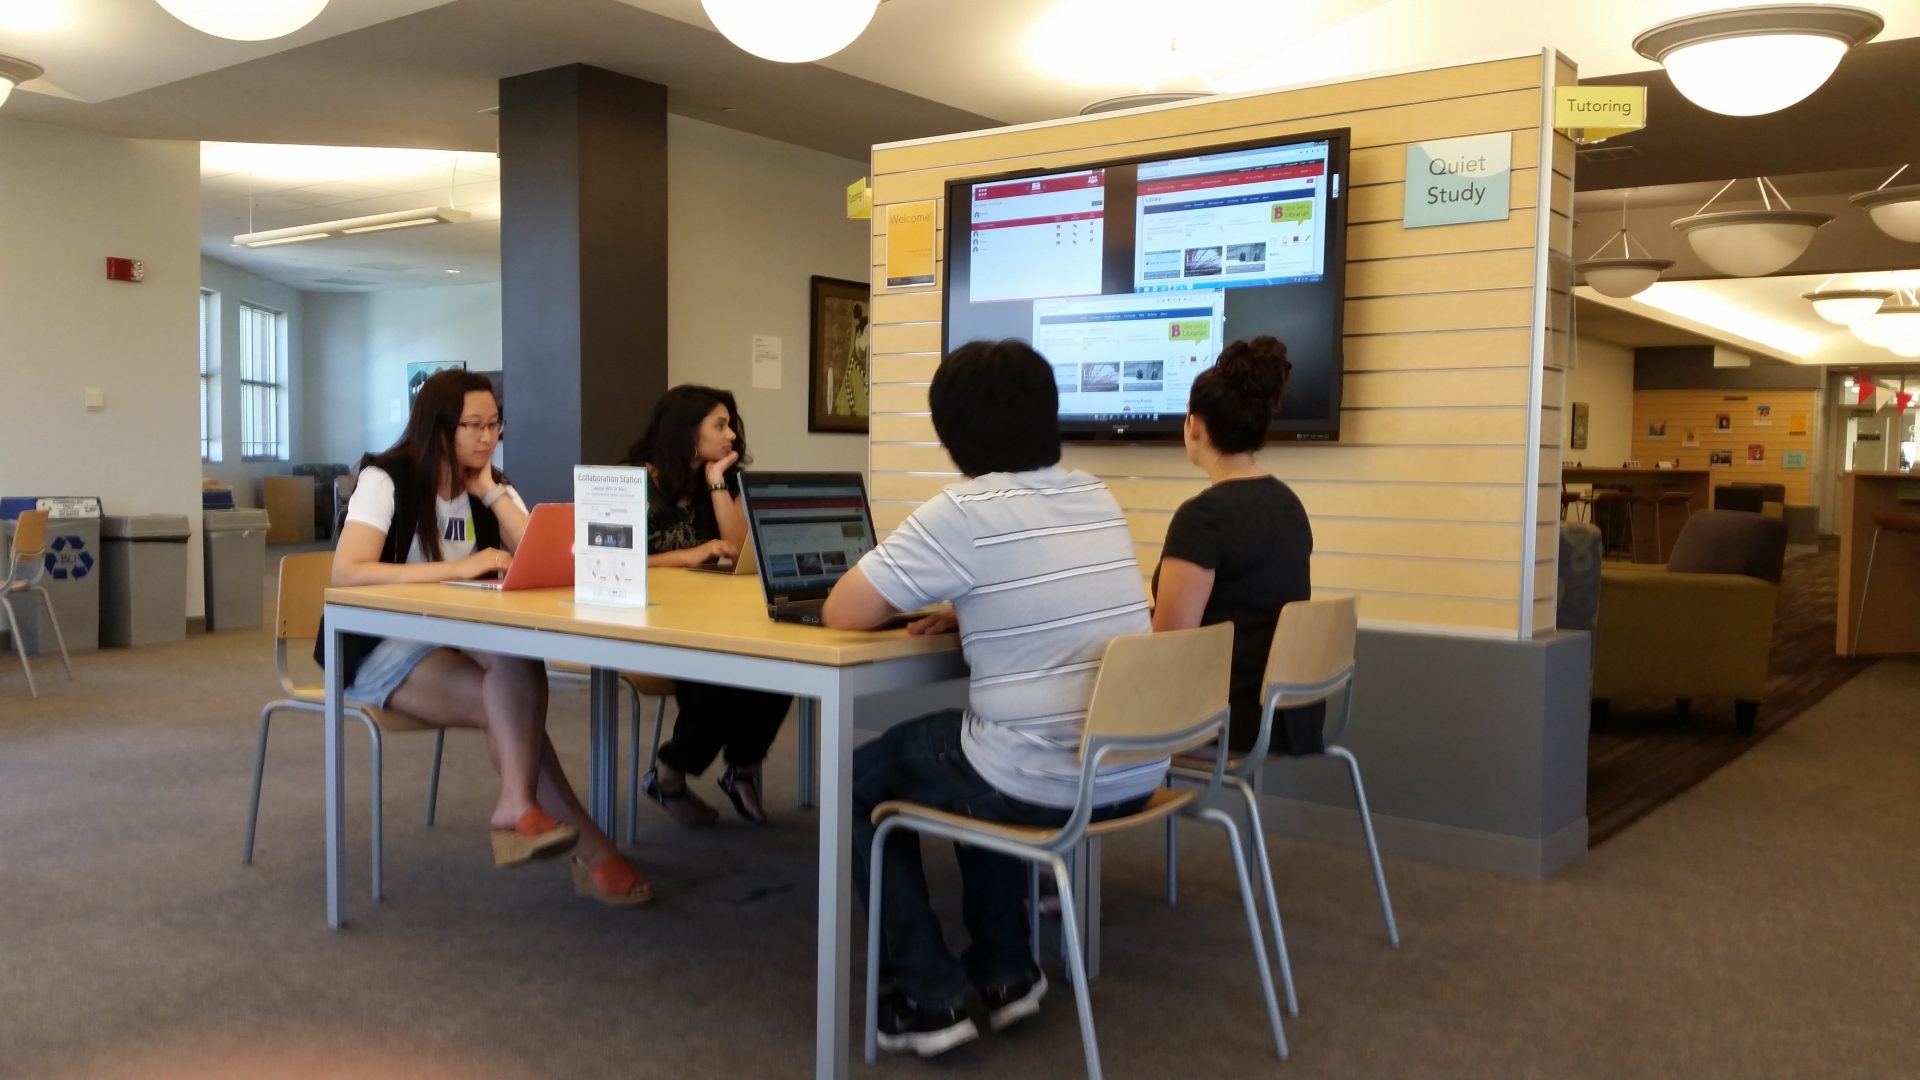 group of students sitting together at a table watching a large tv screen in the library